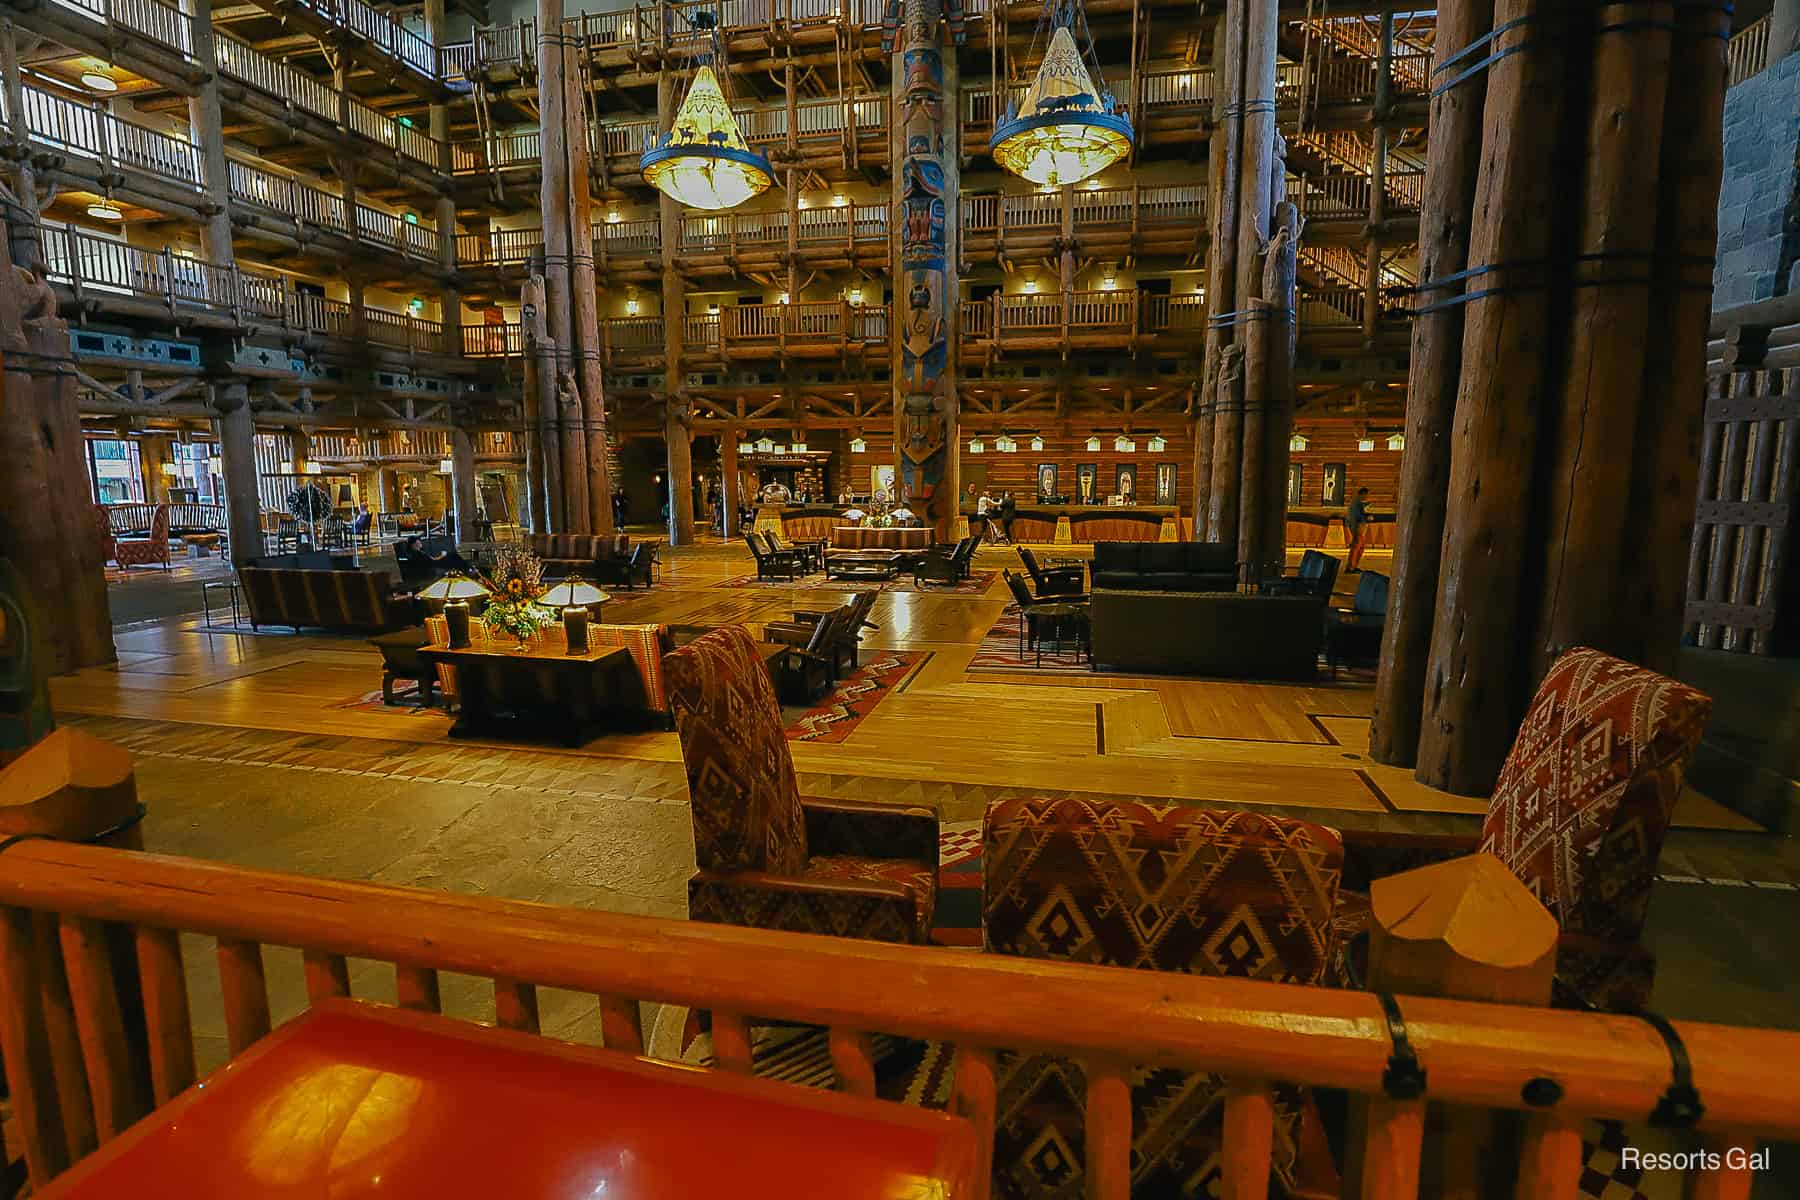 a view of the Wilderness Lodge lobby from inside Whispering Canyon Cafe